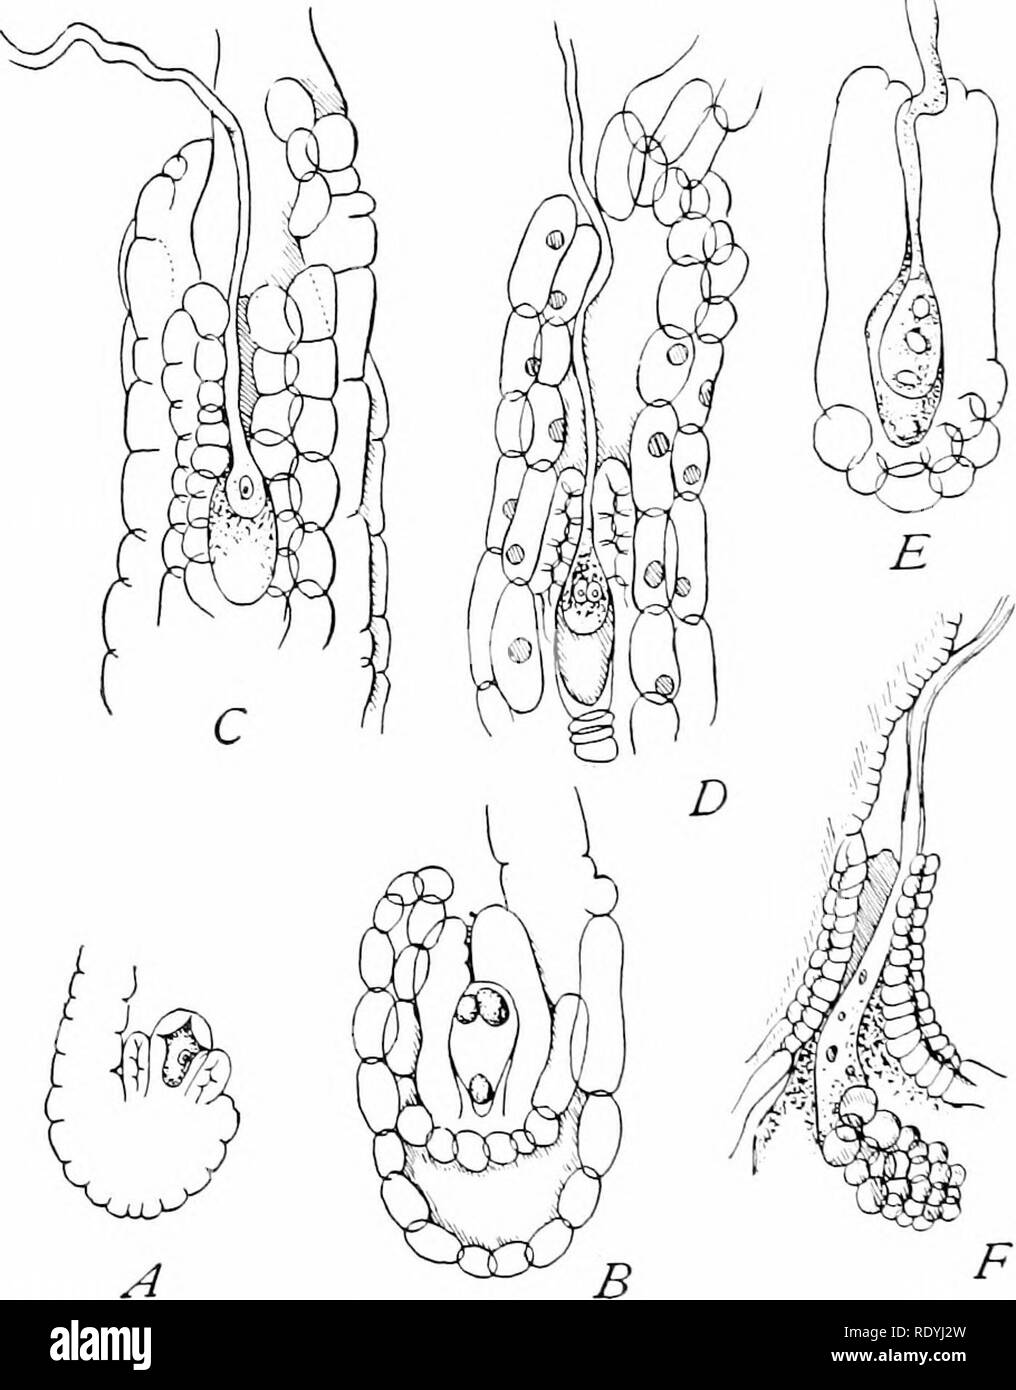 . Morphology of angiosperms (Morphology of spermatophytes. Part II). Angiosperms; Plant morphology. 144 MORPHOLOGY OF ANGIOSPEEMS the pollen-grain with its pollen-tube and some contents, as well as the ovule with its integuments and embryo-sac; and the pollen-tube had been traced from the stigma to the embryo-sac.. Fig. 65.—A-C, Orchis Mono; D, 0. latifolia; E, 0. maculata; F, Carina limbata. A-B, young ovules, x 150; 0, end of pollen-tube enlarging, x 100; Z), later stage with two nuclei visible in embryo, x 166; £, more advanced embryo, x 208; i7, considerably later stage, x 1'25.—After Scha Stock Photo